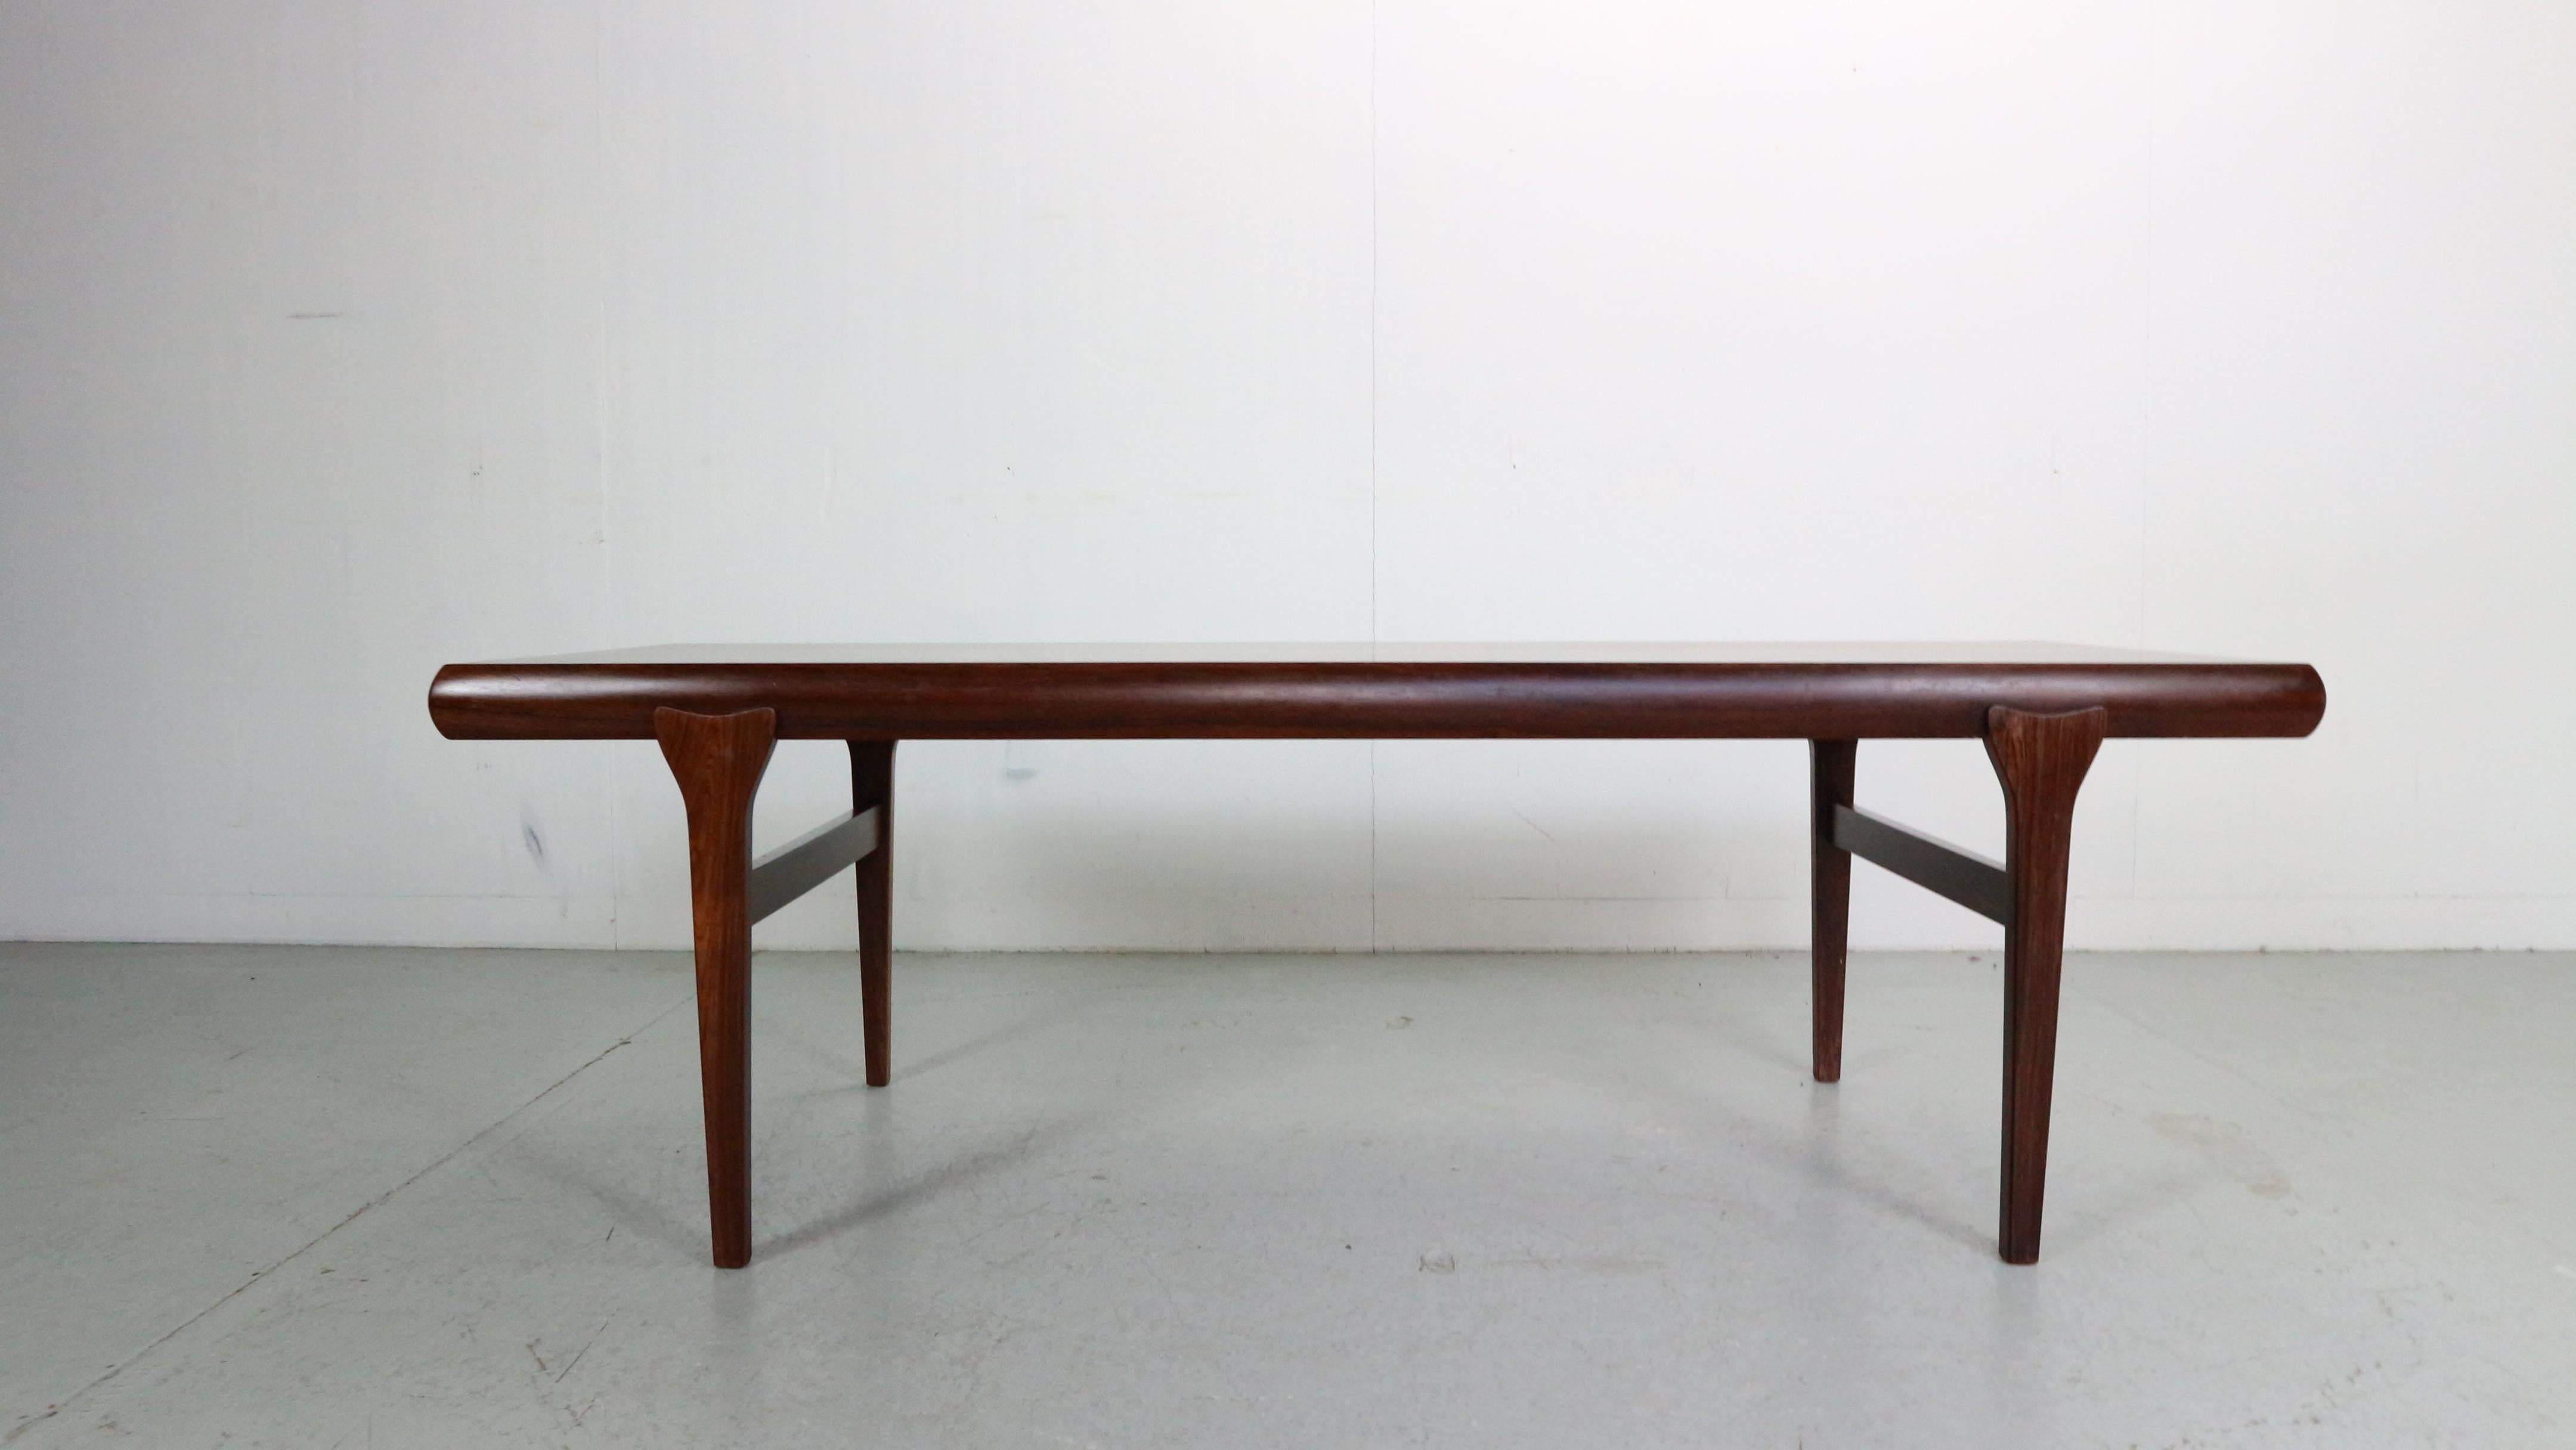 Mid-Century Modern period coffee table designed by Johannes Andersen and manufactured by Silkeborg Møbelfabrik, 1960's Denmark.

Made of  brazilian rosewood. Has a secret pull out tray/ drawers from both sides.
It comes with certificate for